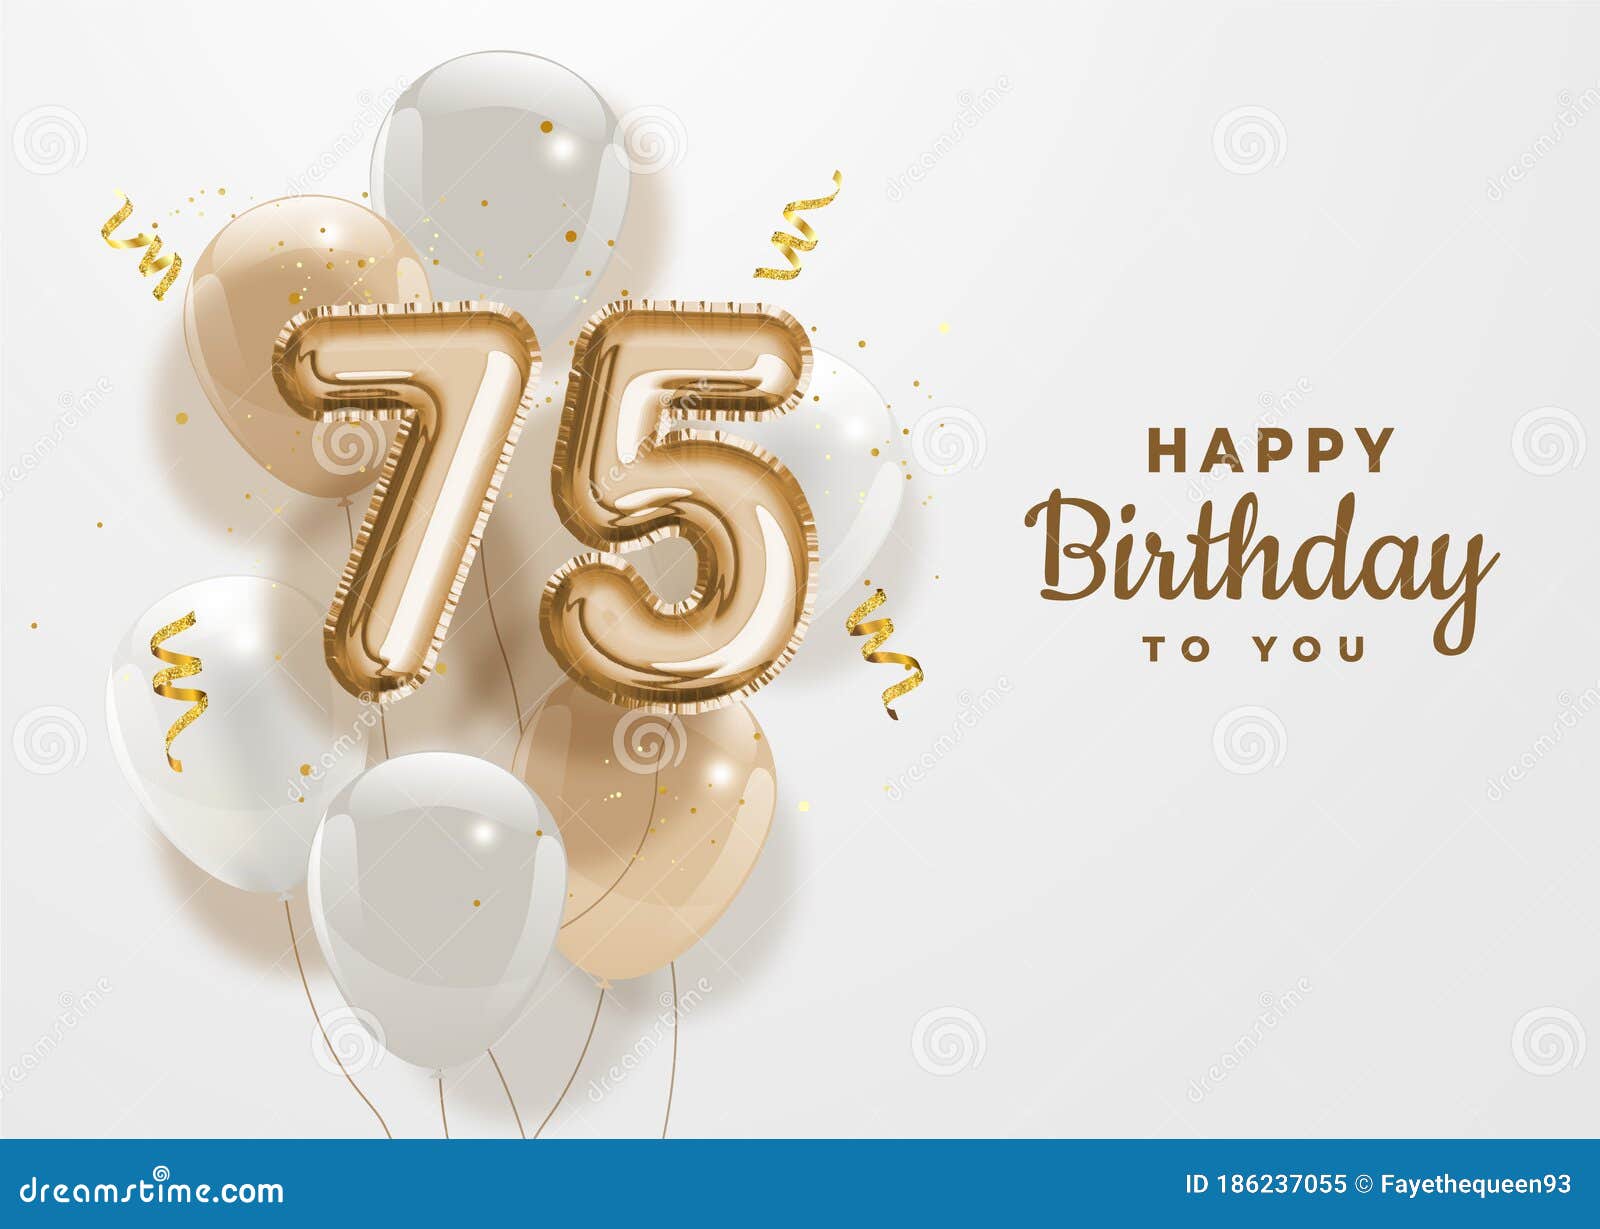 Happy 75th Birthday Gold Foil Balloon Greeting Background. Stock Vector ...